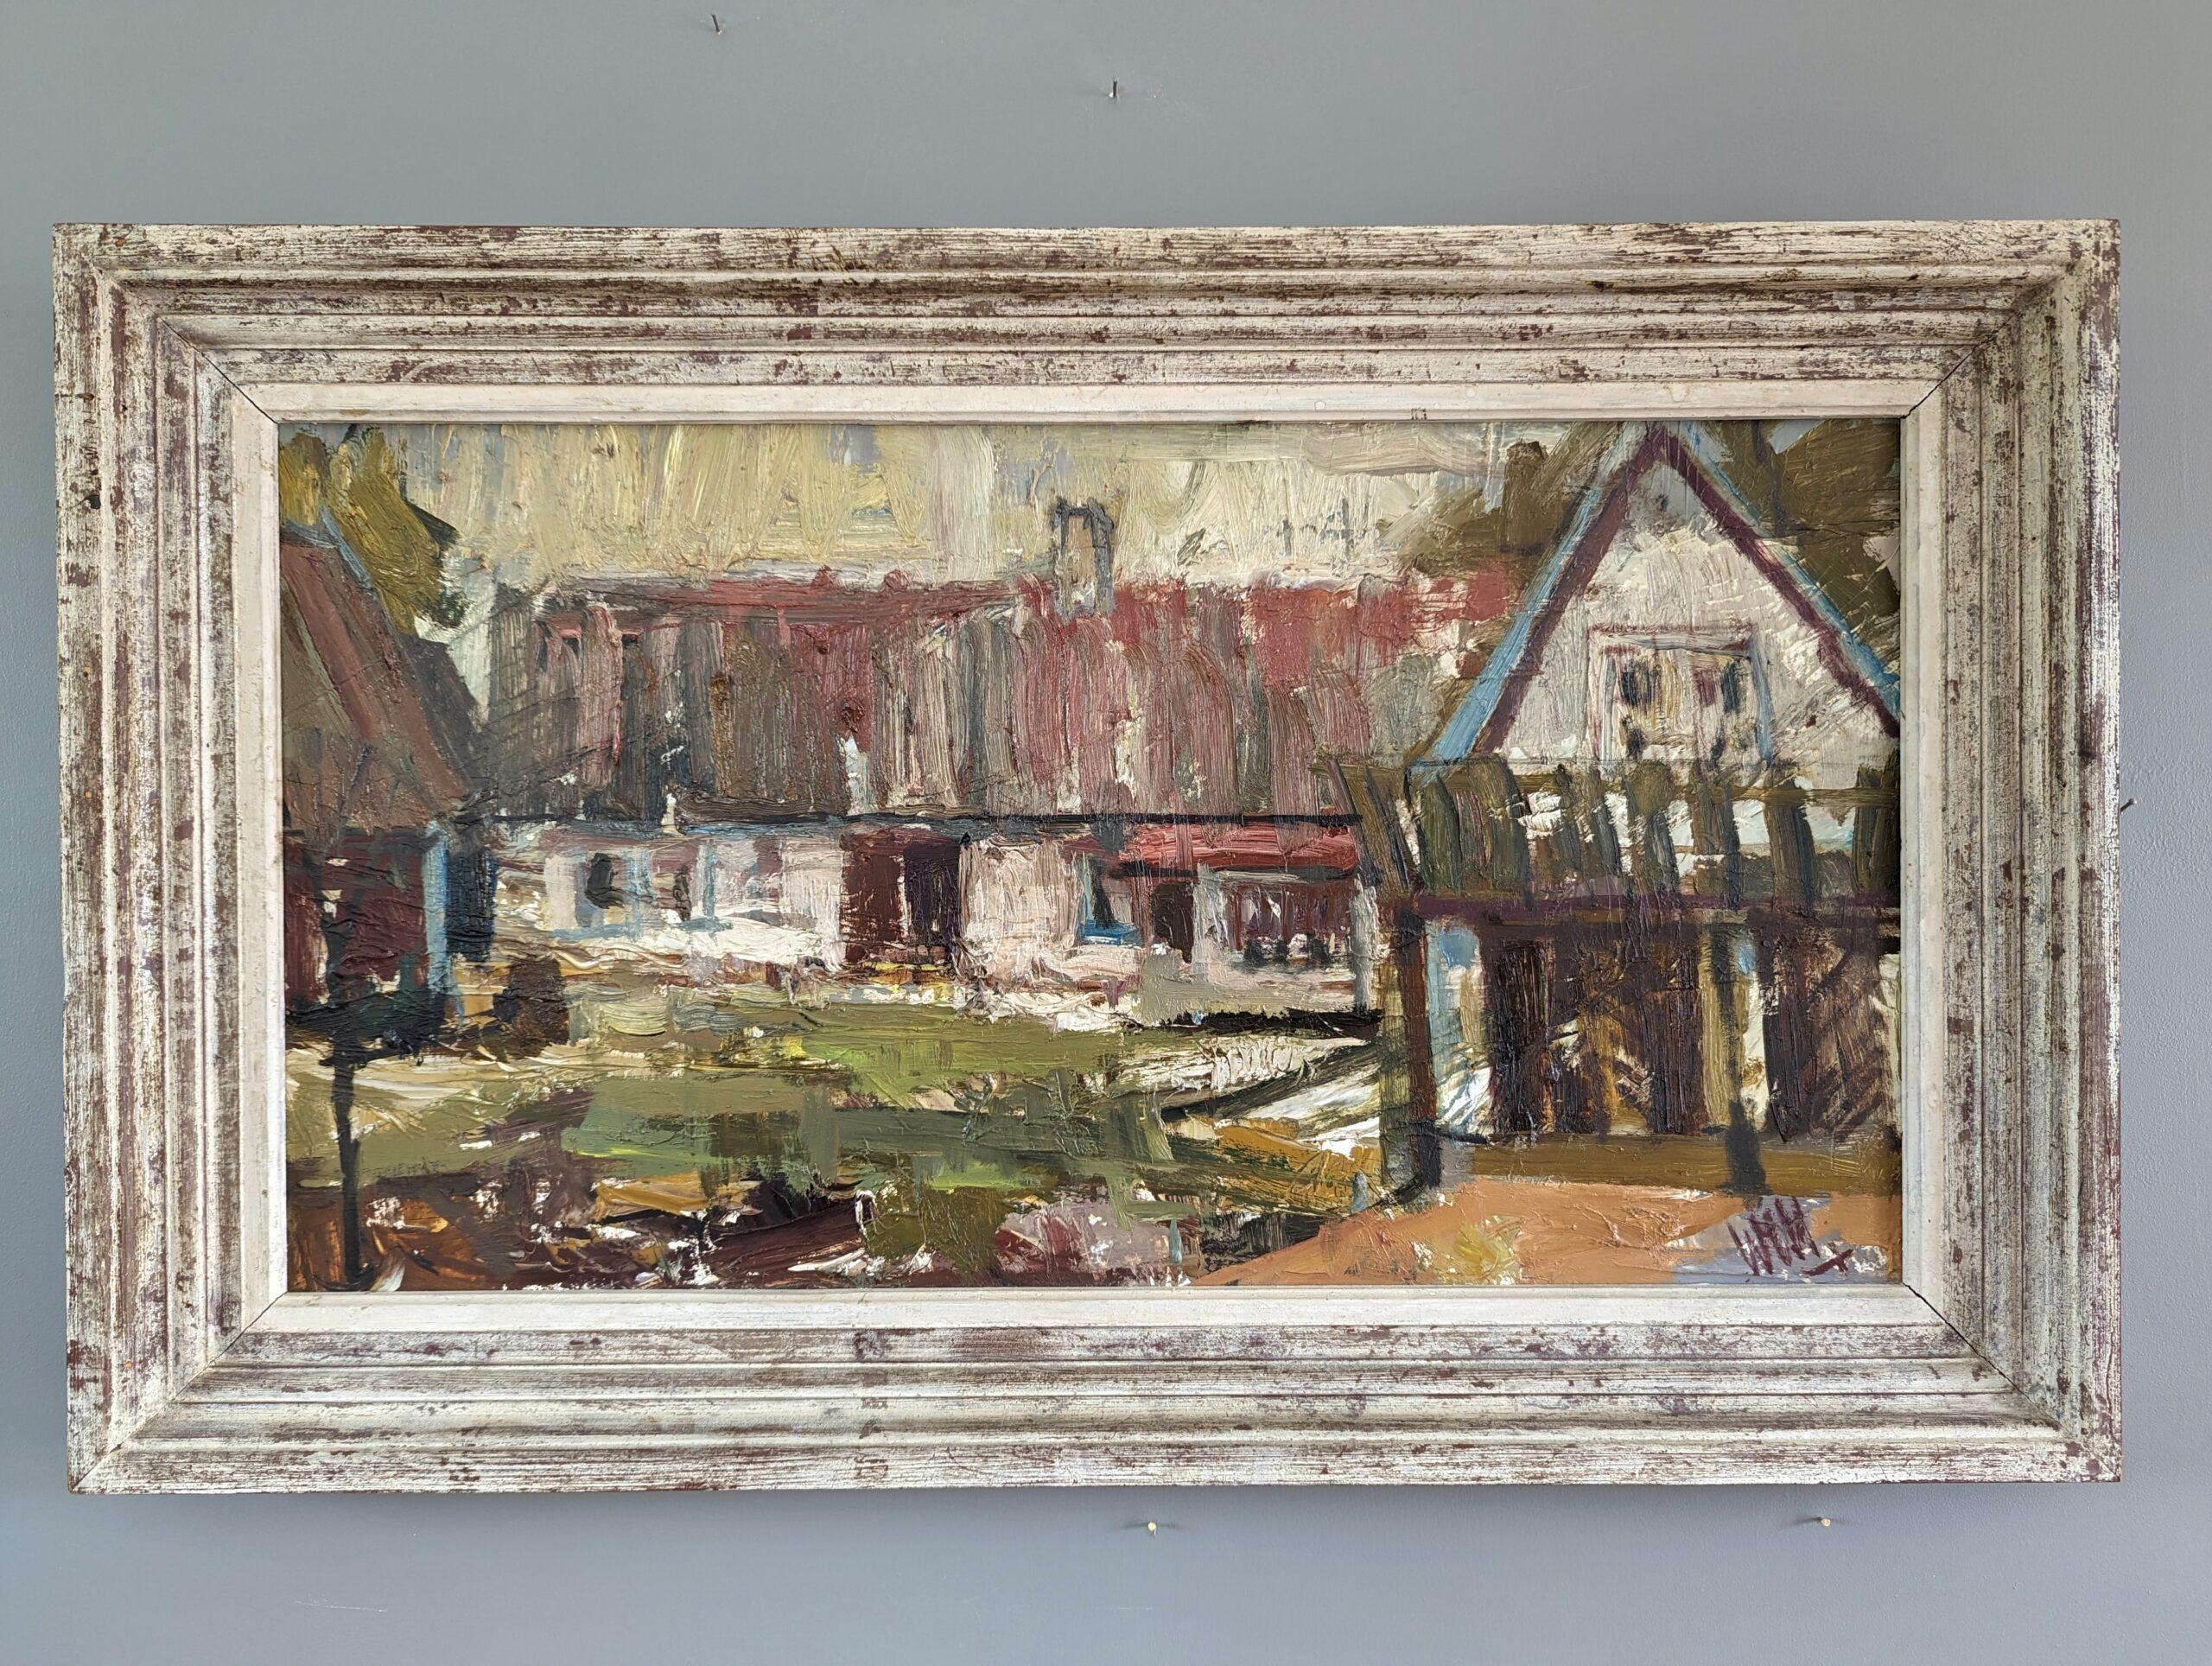 AT THE FARM
Oil on Board
Size: 47 x 76 cm  18.5 x 29.9 inches (including frame)

An excellent mid-century modernist landscape composition, painted in oil onto board.

This expressionist piece features broad, gestural sweeping brushstrokes in warm